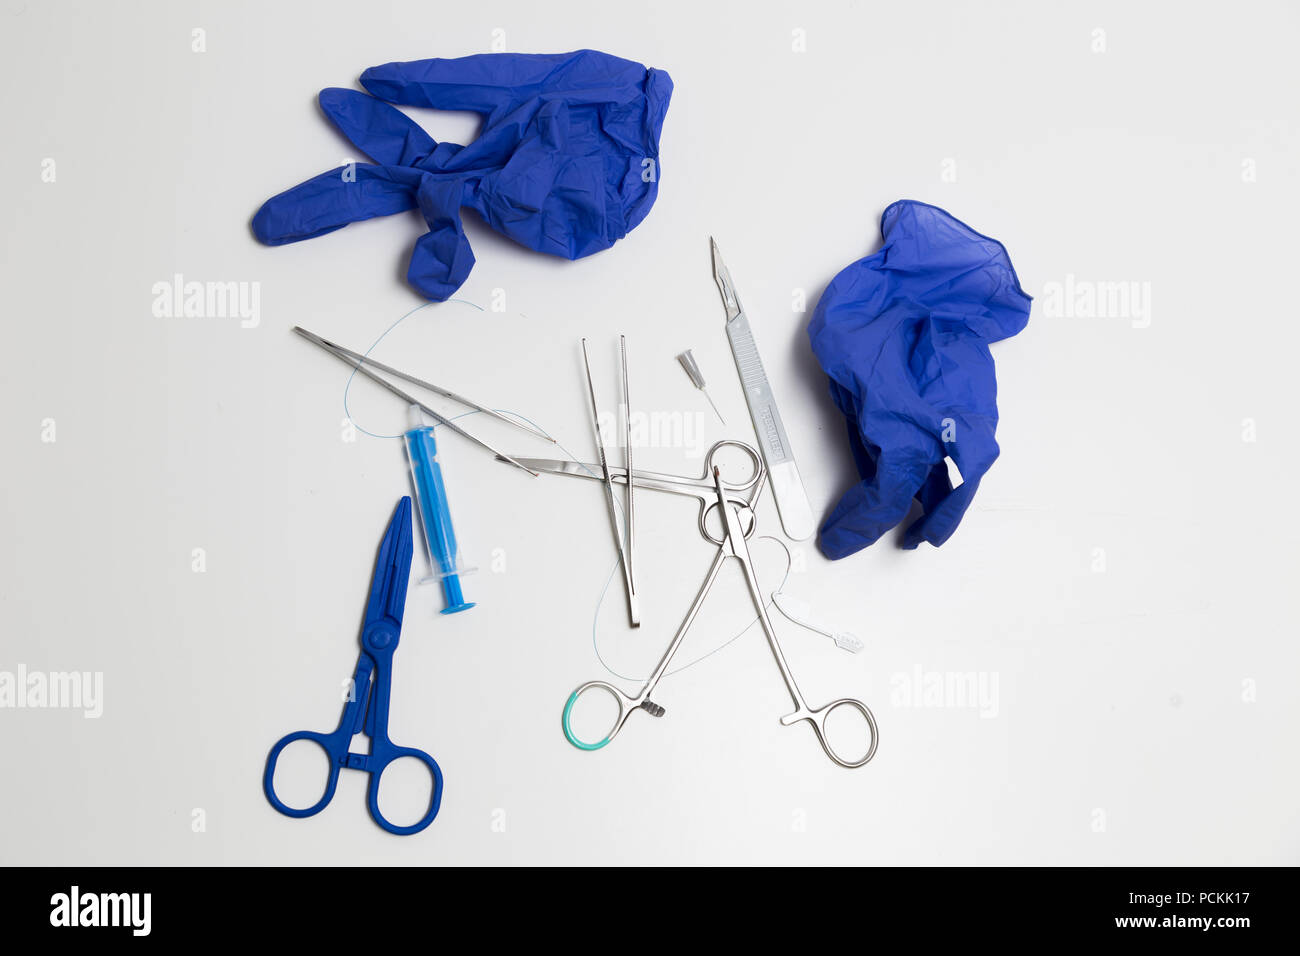 suergery equipment after use Stock Photo